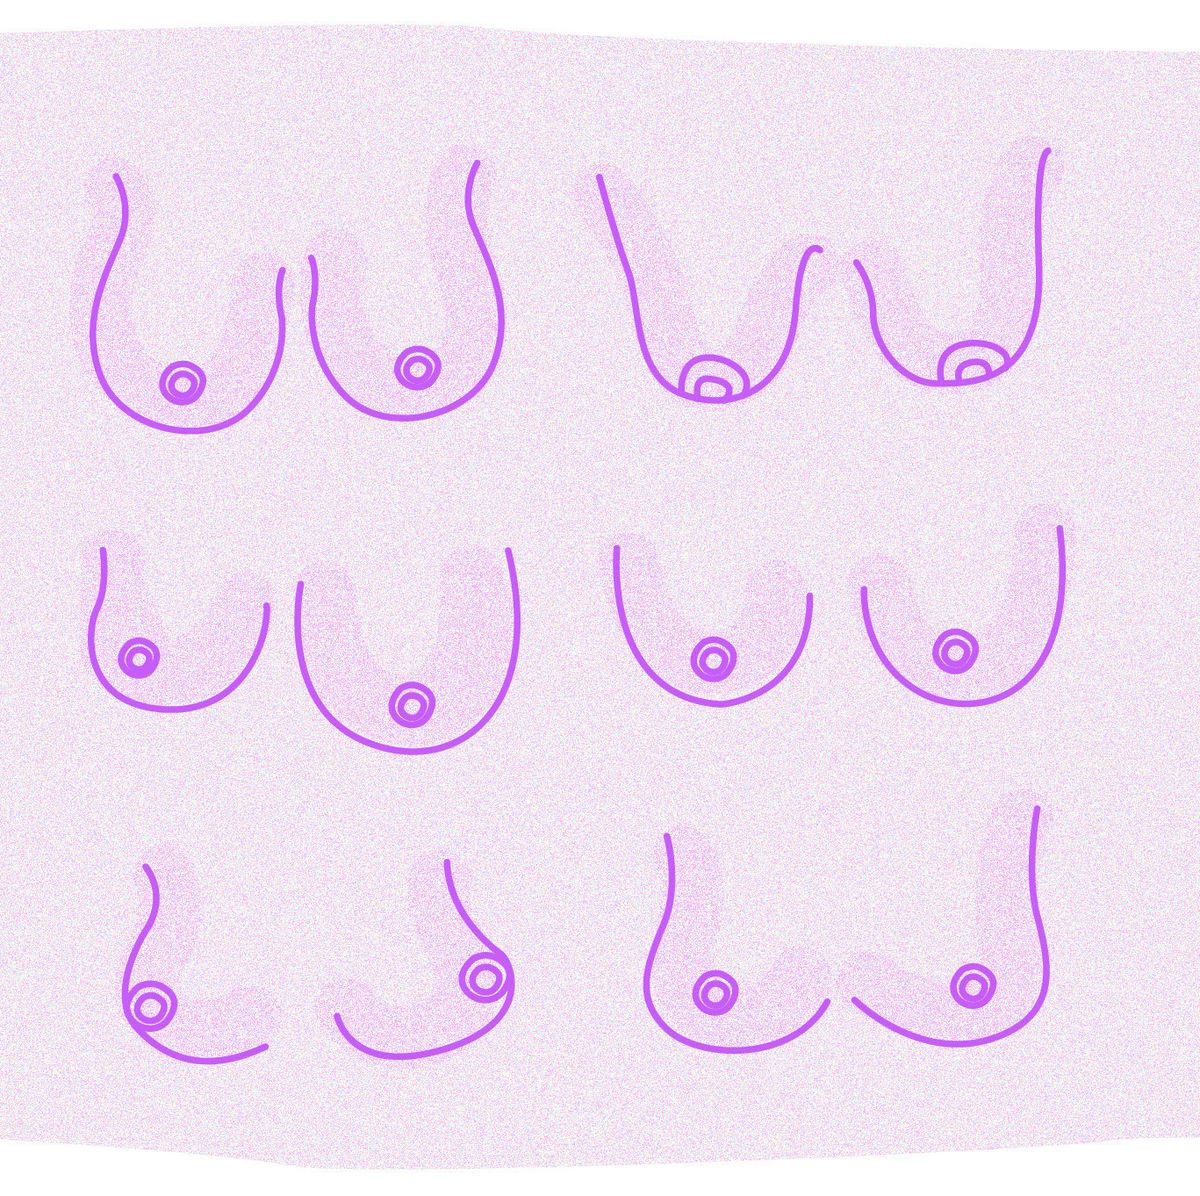 Clue on X: Boobs: Varieties of breast shapes and nipple types →    / X